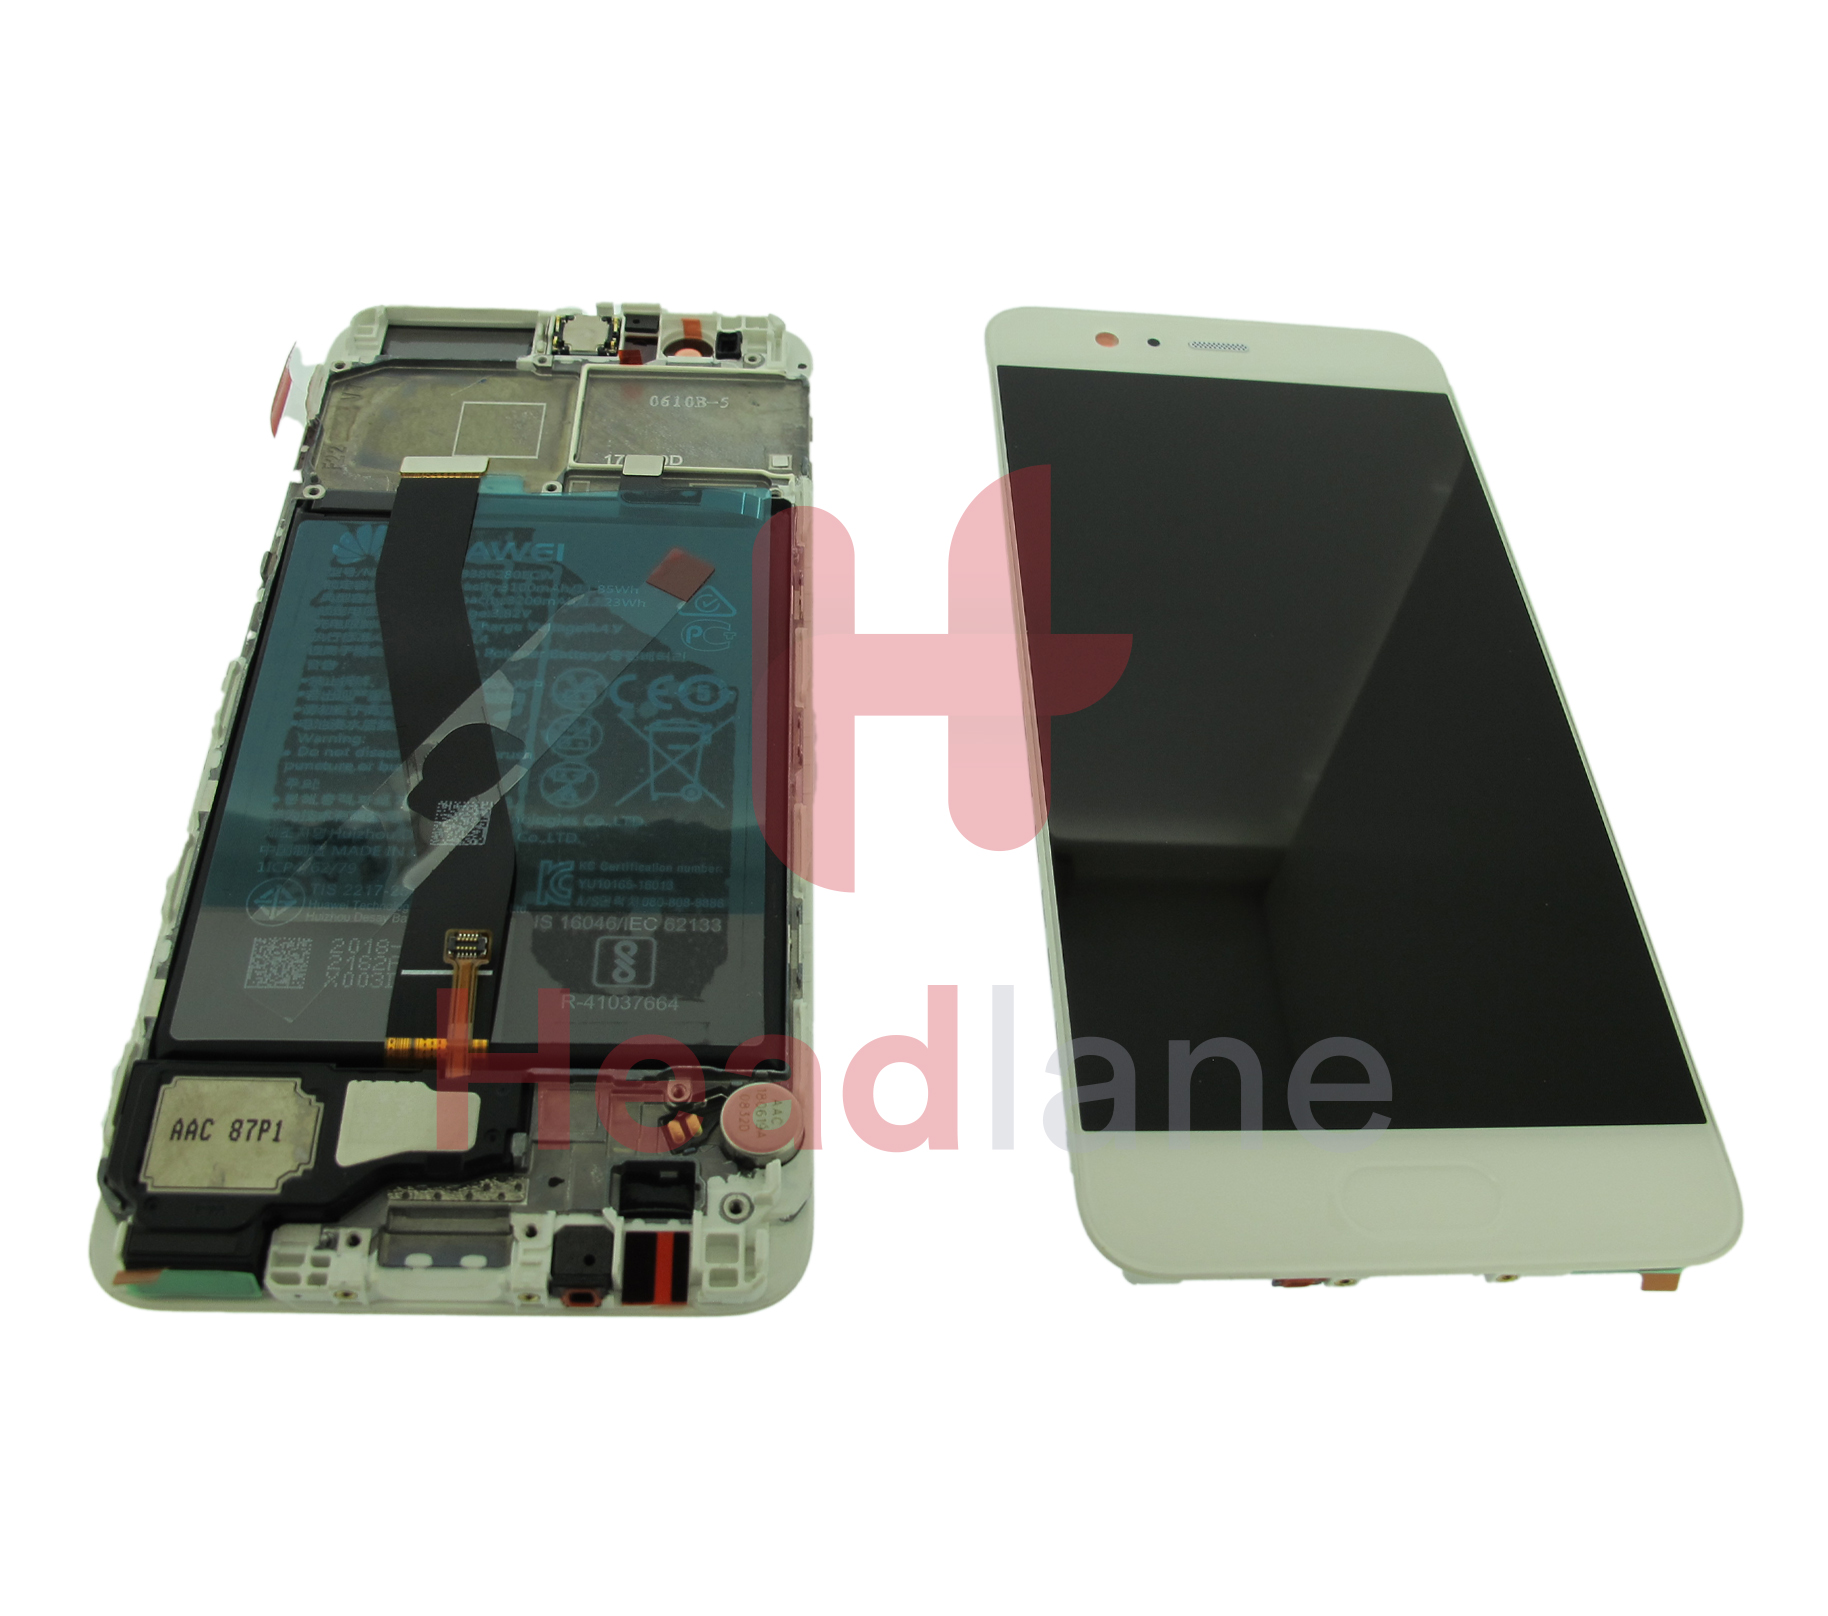 Huawei P10 LCD Display / Screen + Touch + Battery Assembly - Silver / White